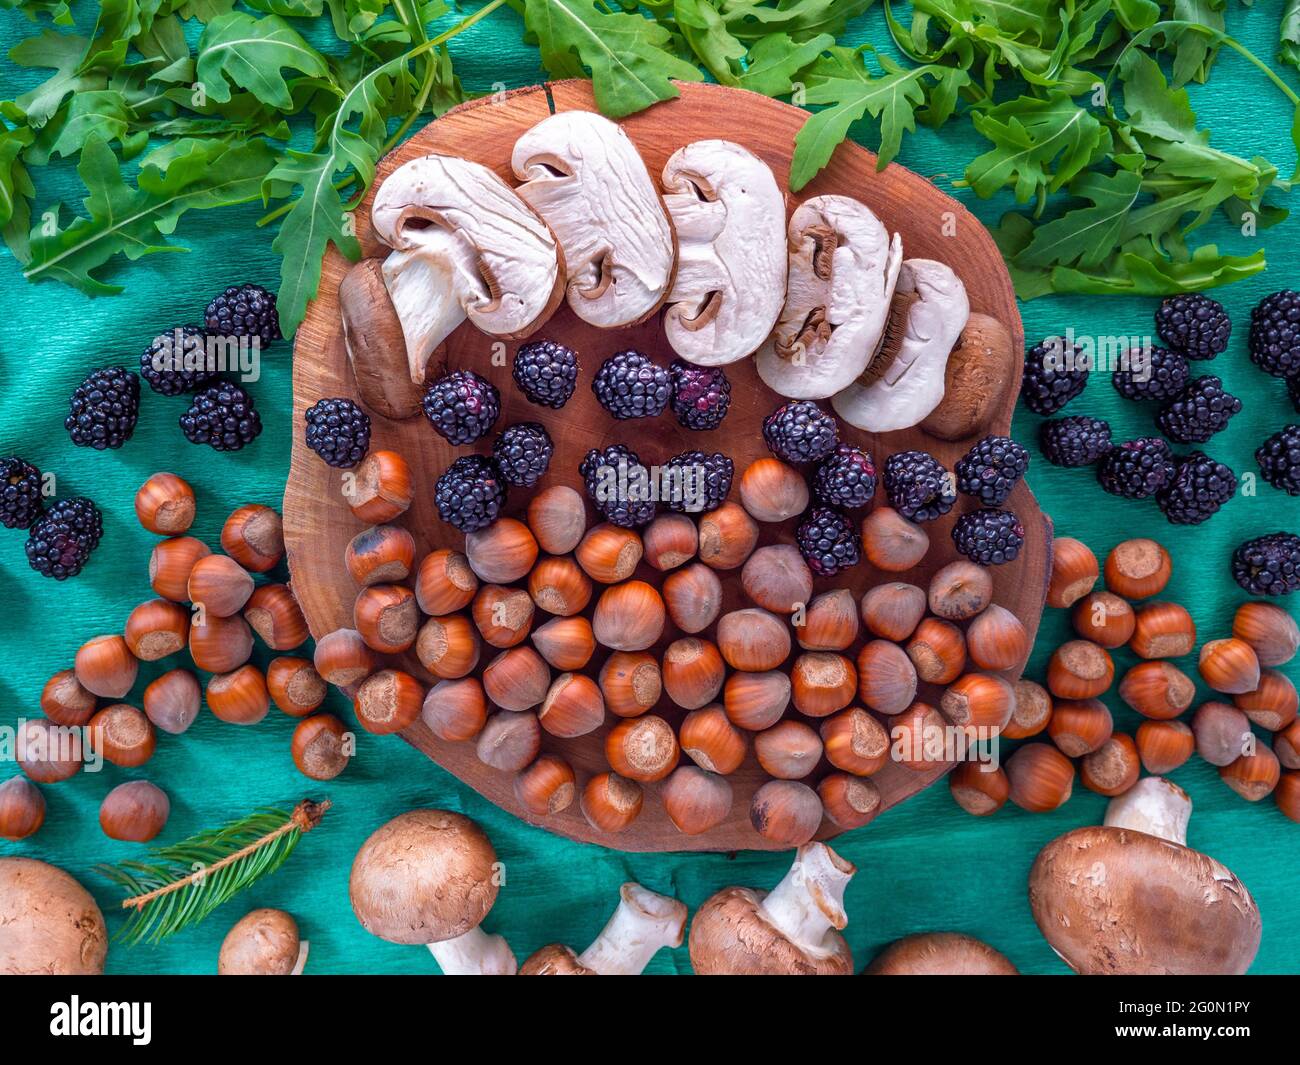 Healthy autumn food selection: white sliced mushrooms, shelled hazelnuts, arugula rocket salad, blackberries, and tiny fir branch on green background. Stock Photo